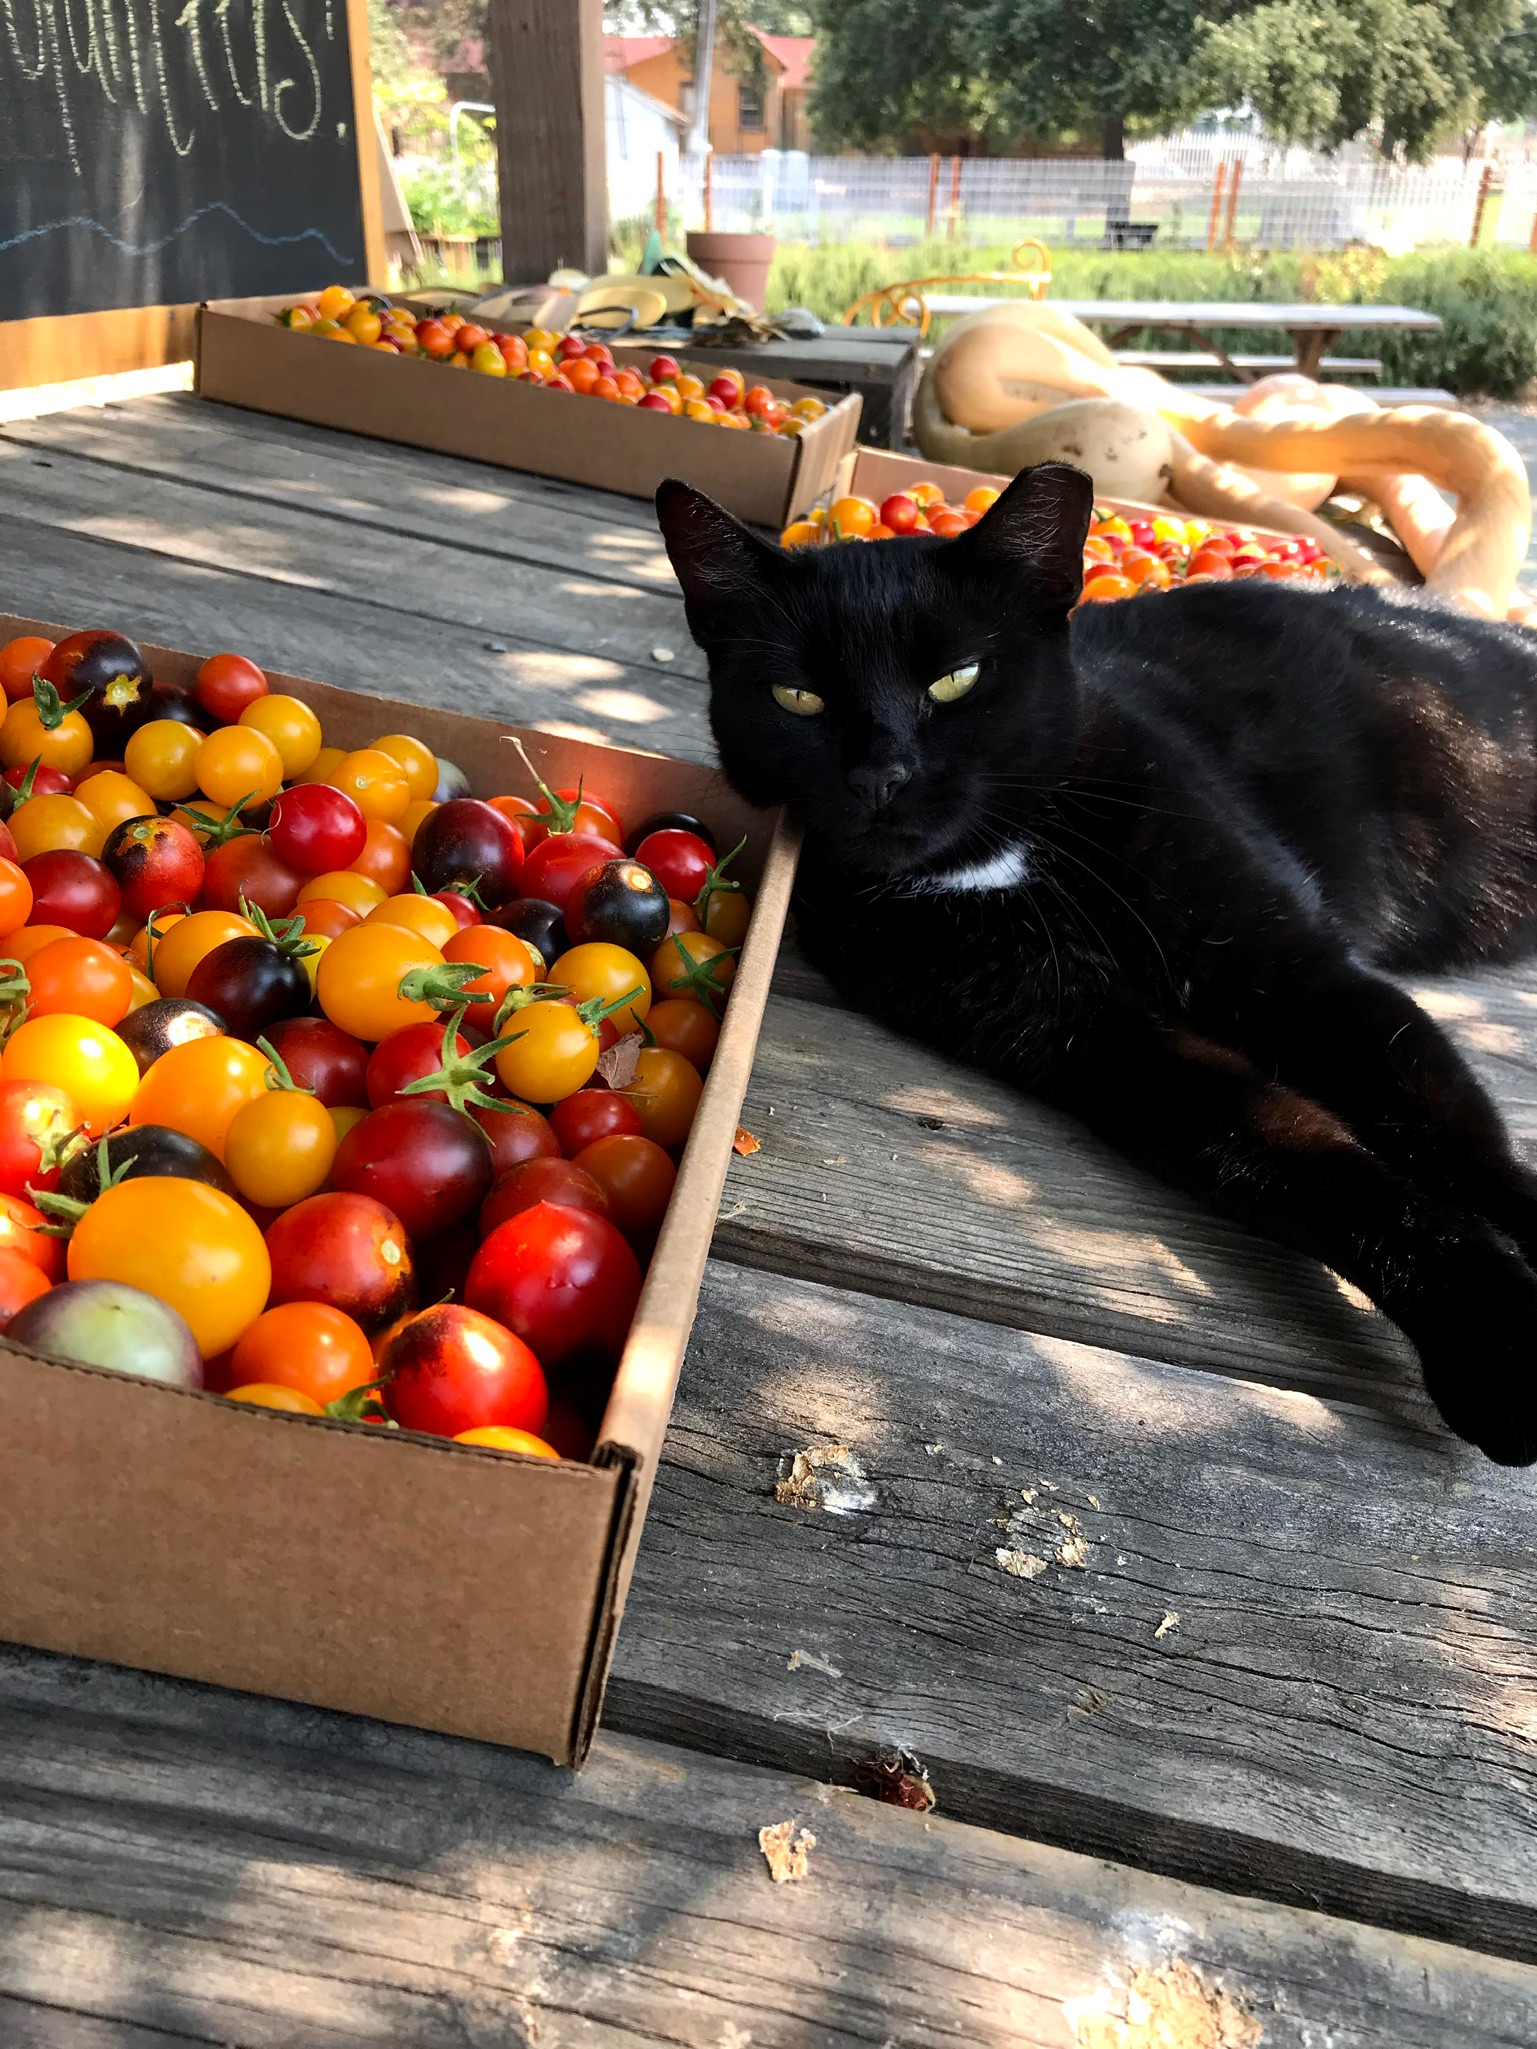 Shadow leaning on a box filled with small tomatoes